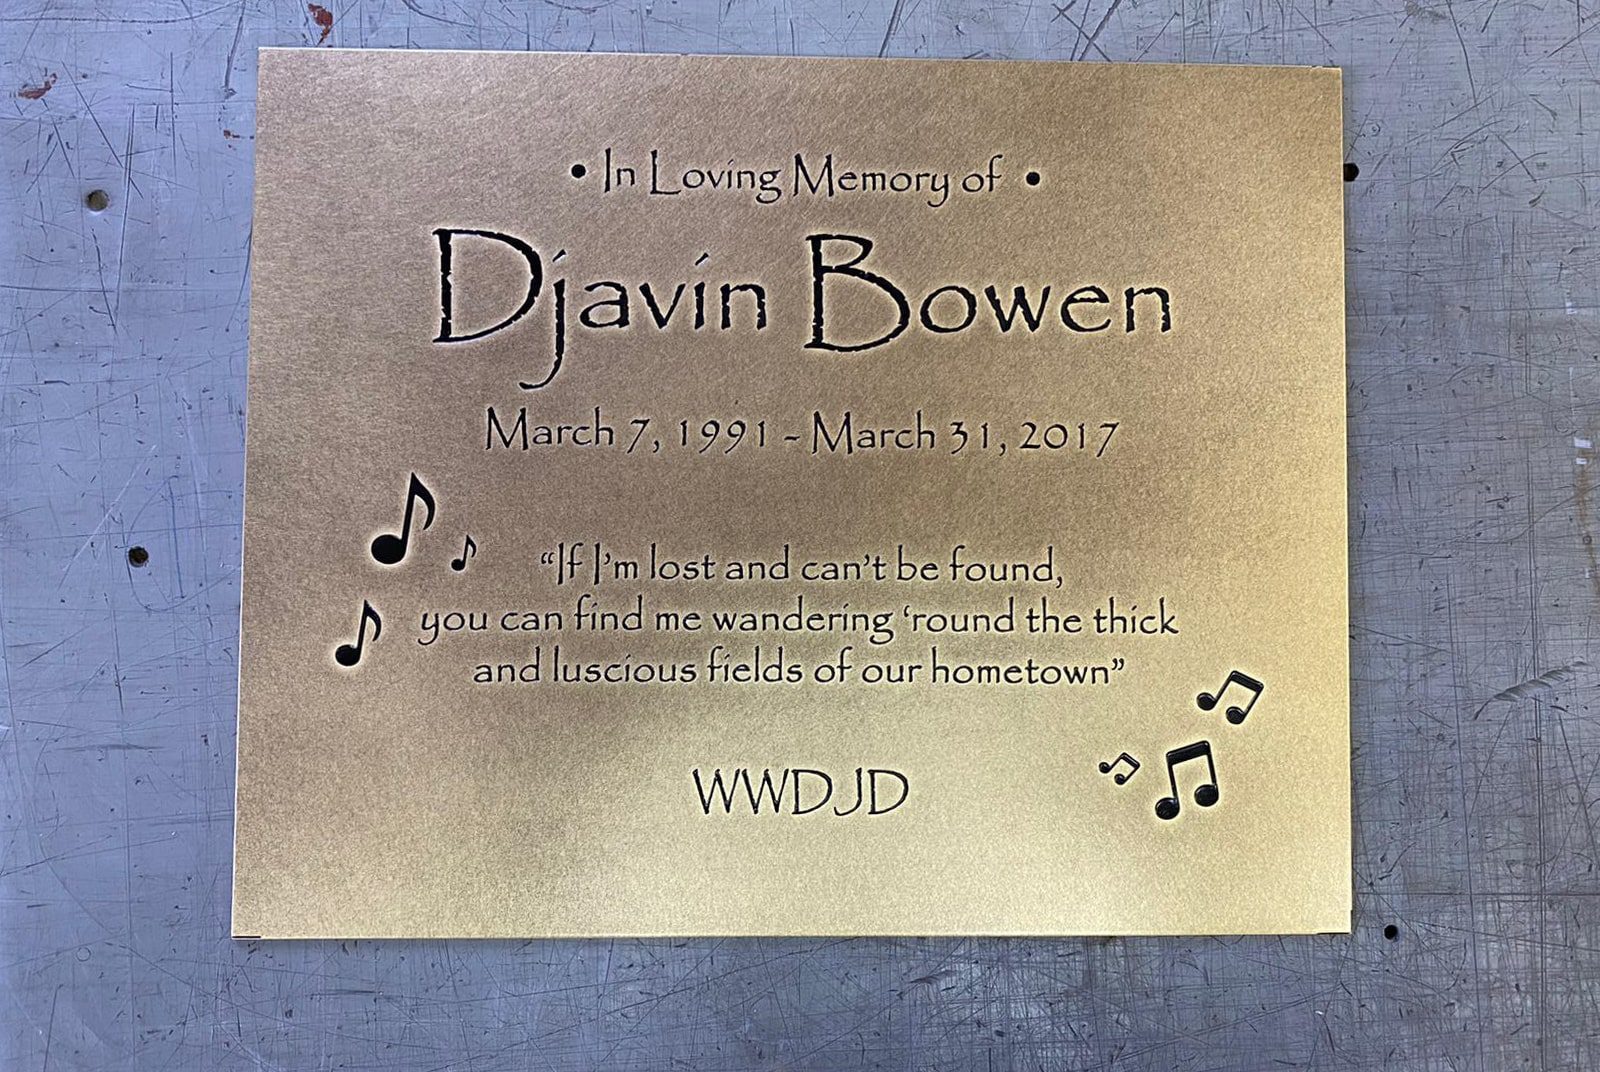 Personalized Commemorative Plaques from $150